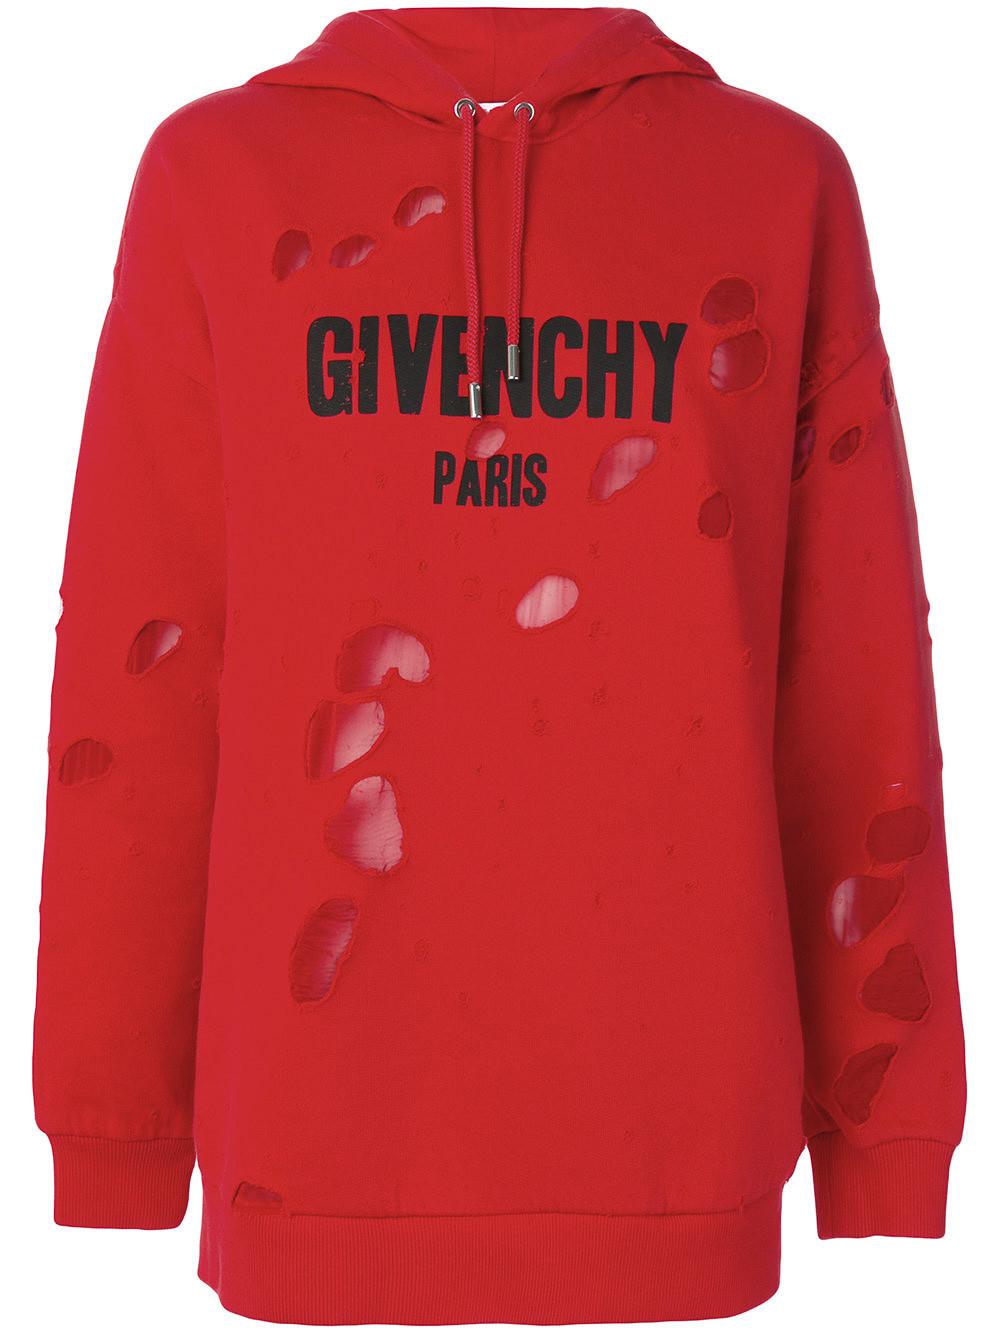 givenchy paris red hoodie